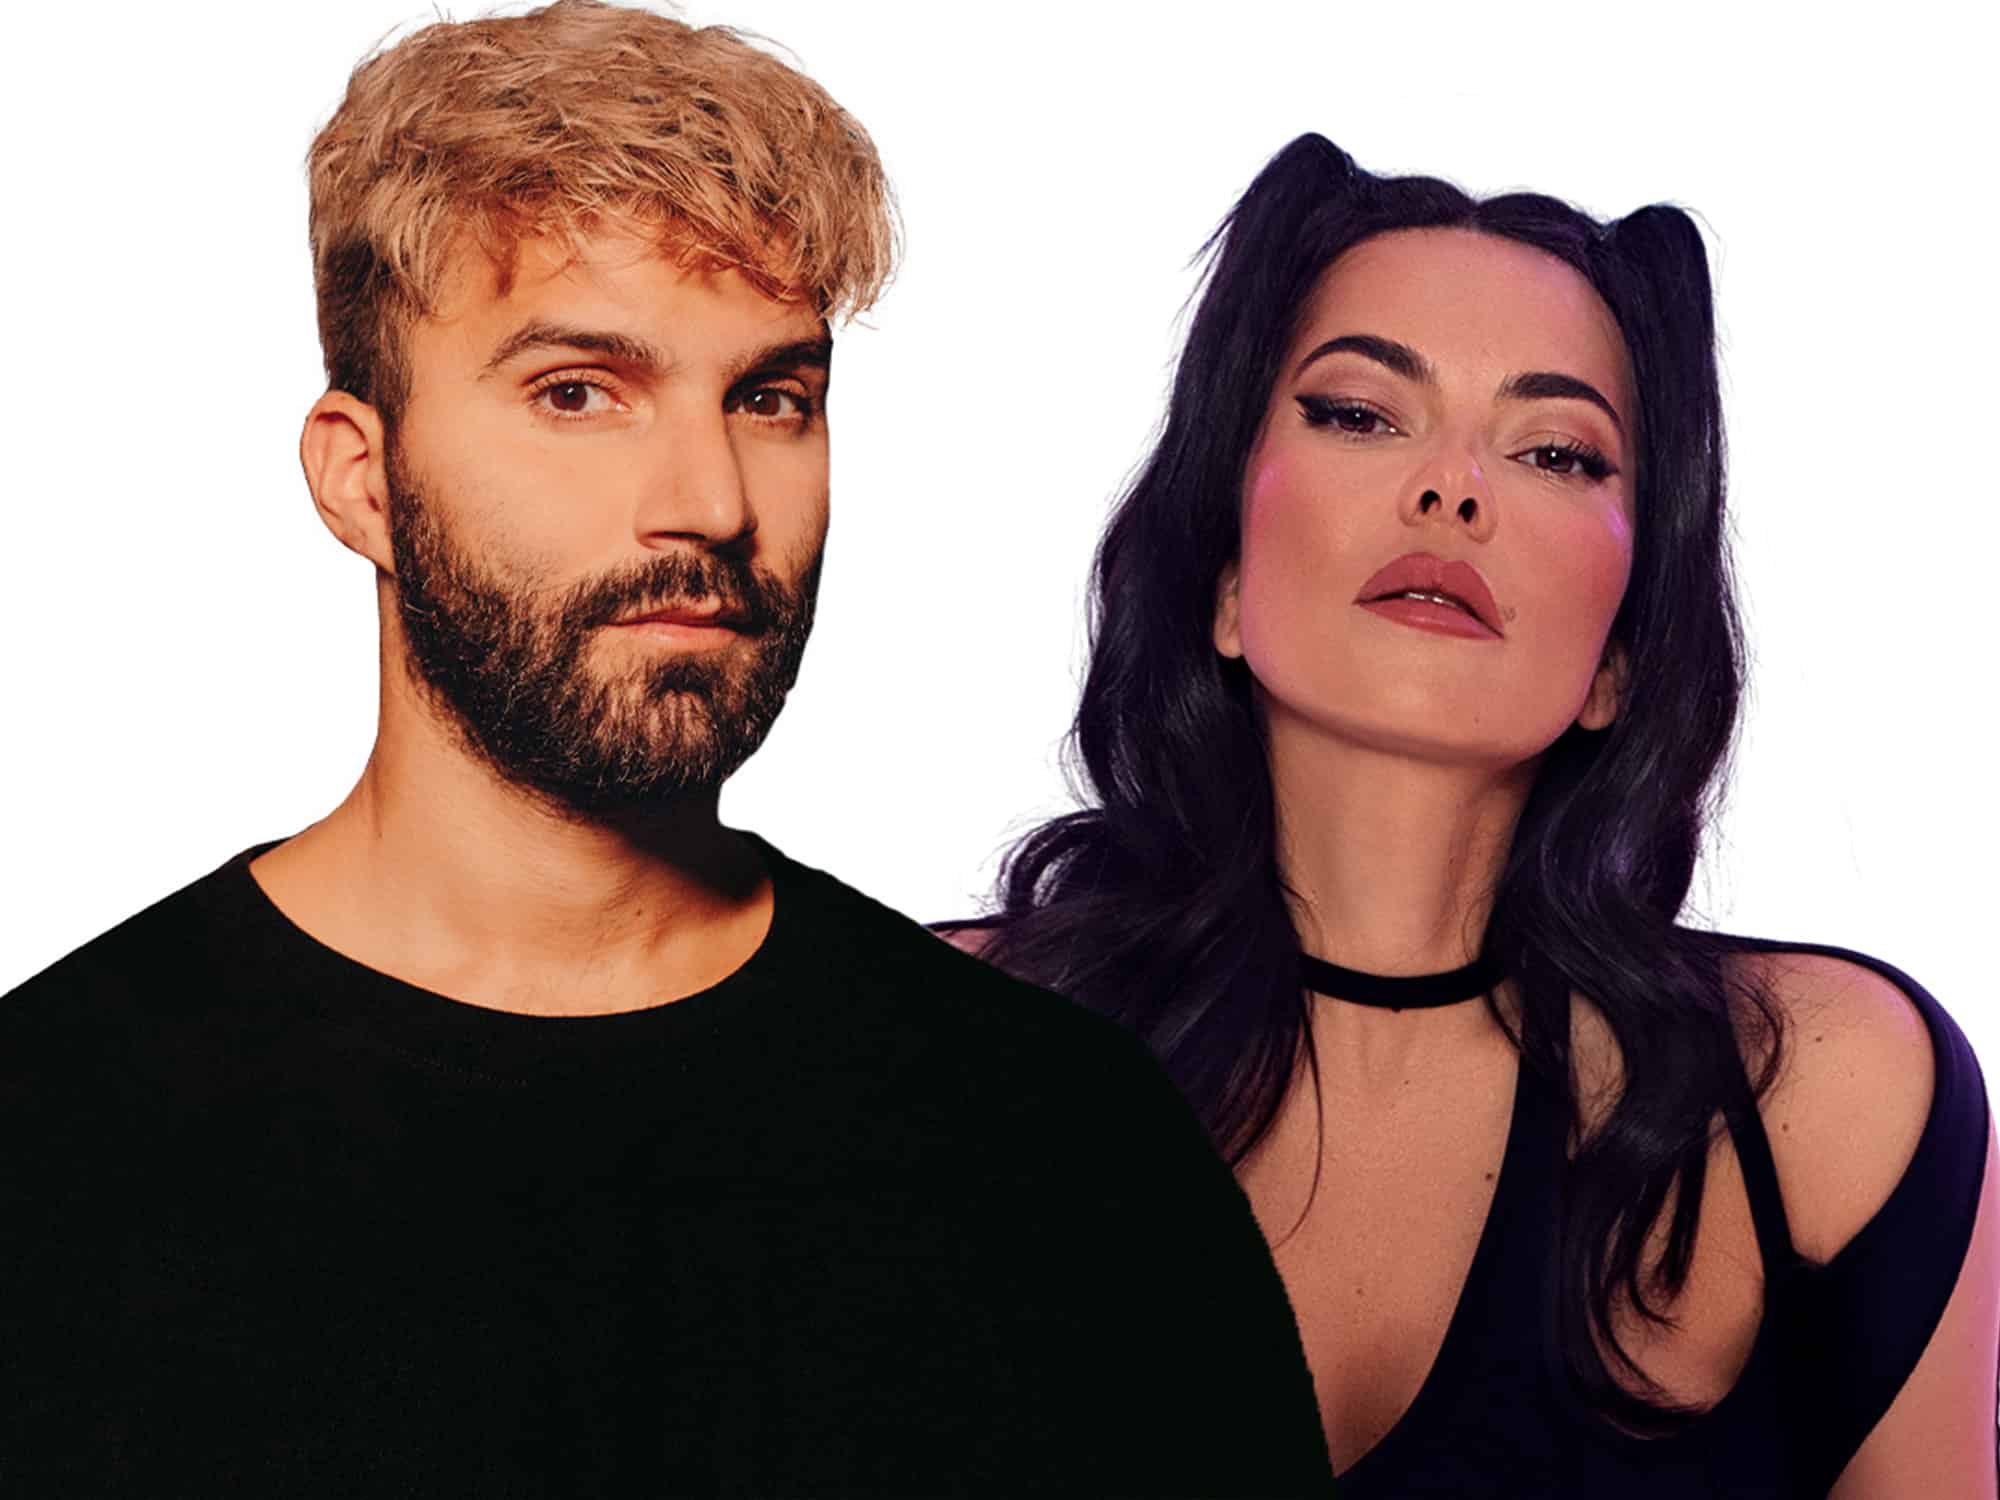 R3HAB teams up with INNA for smash track ‘Rock My Body’: Listen